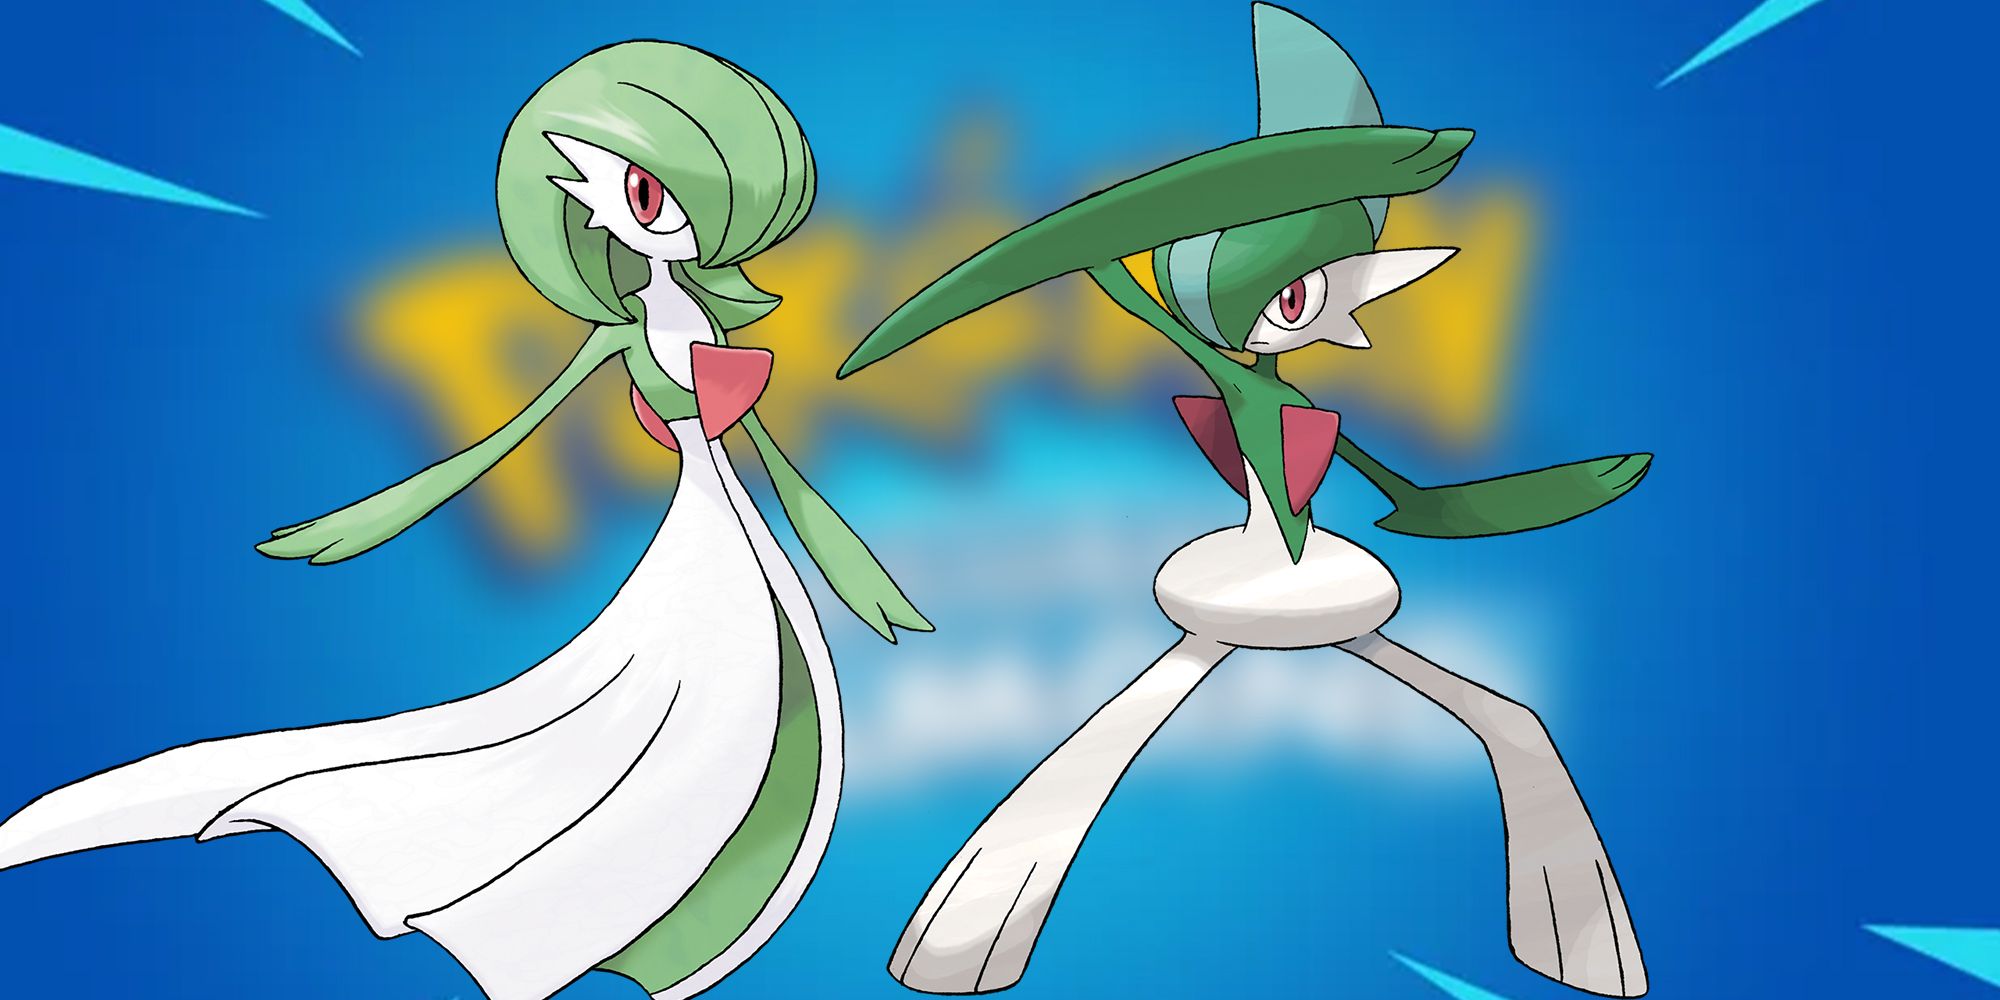 Kirlia is a Pokémon that can evolve into either Gardevoir or Gallade in Pok...